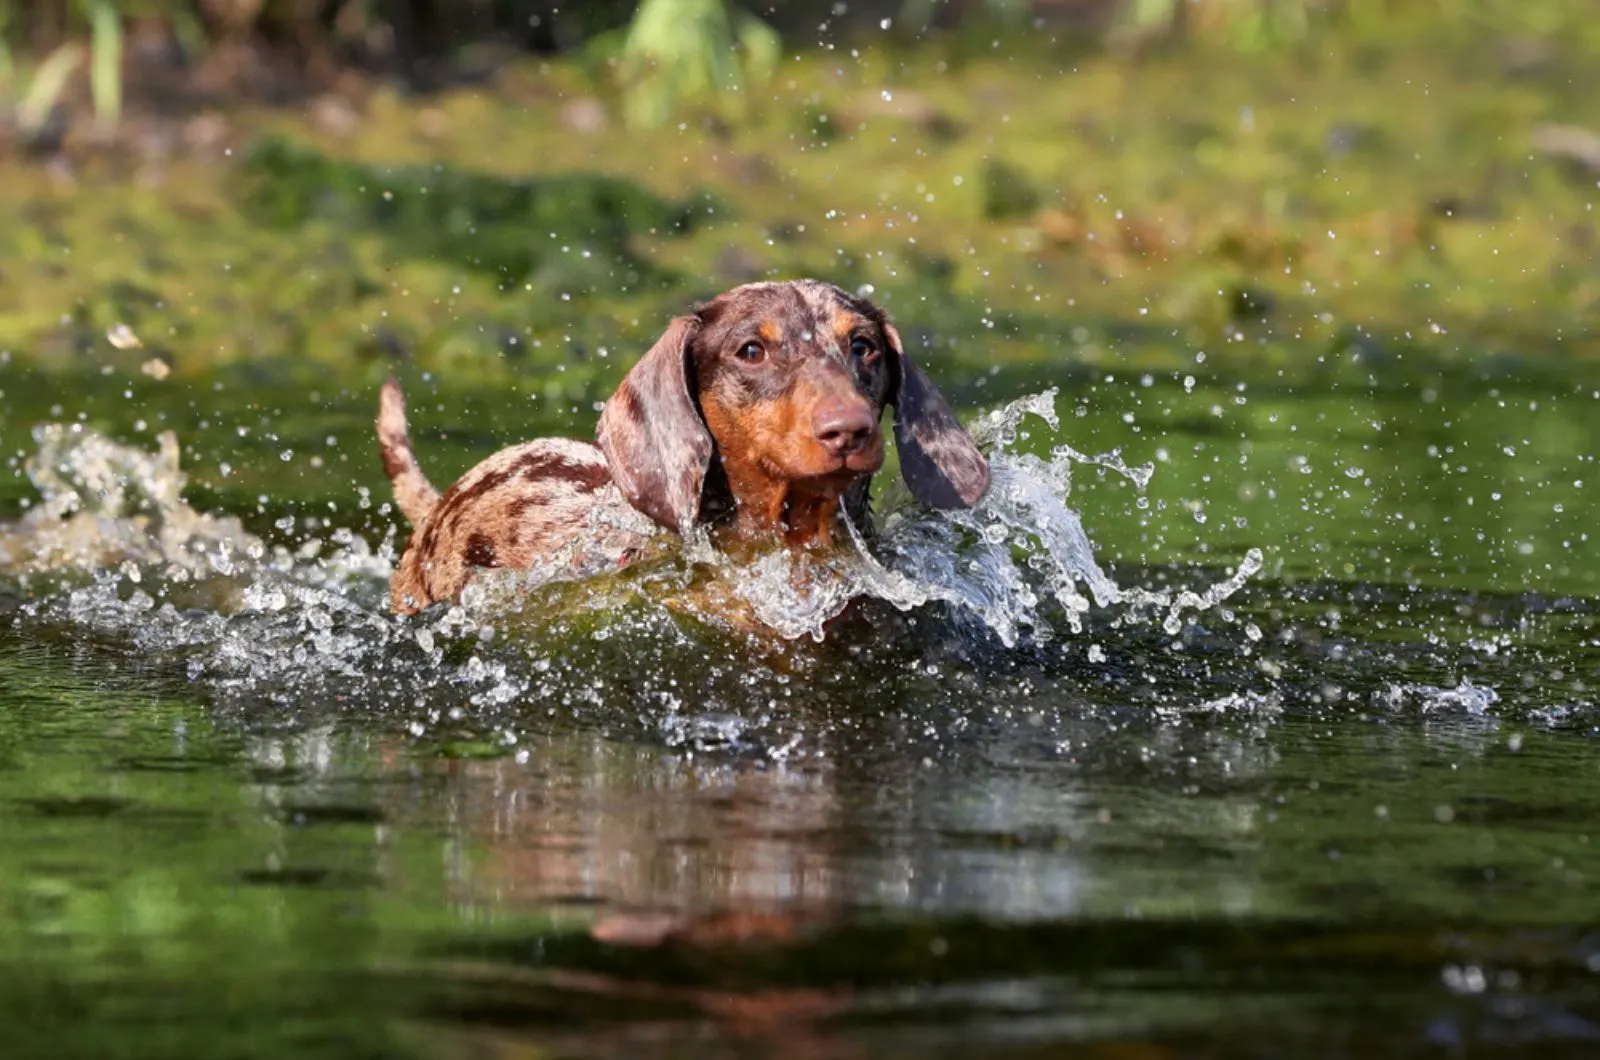 dachshund playing in the water